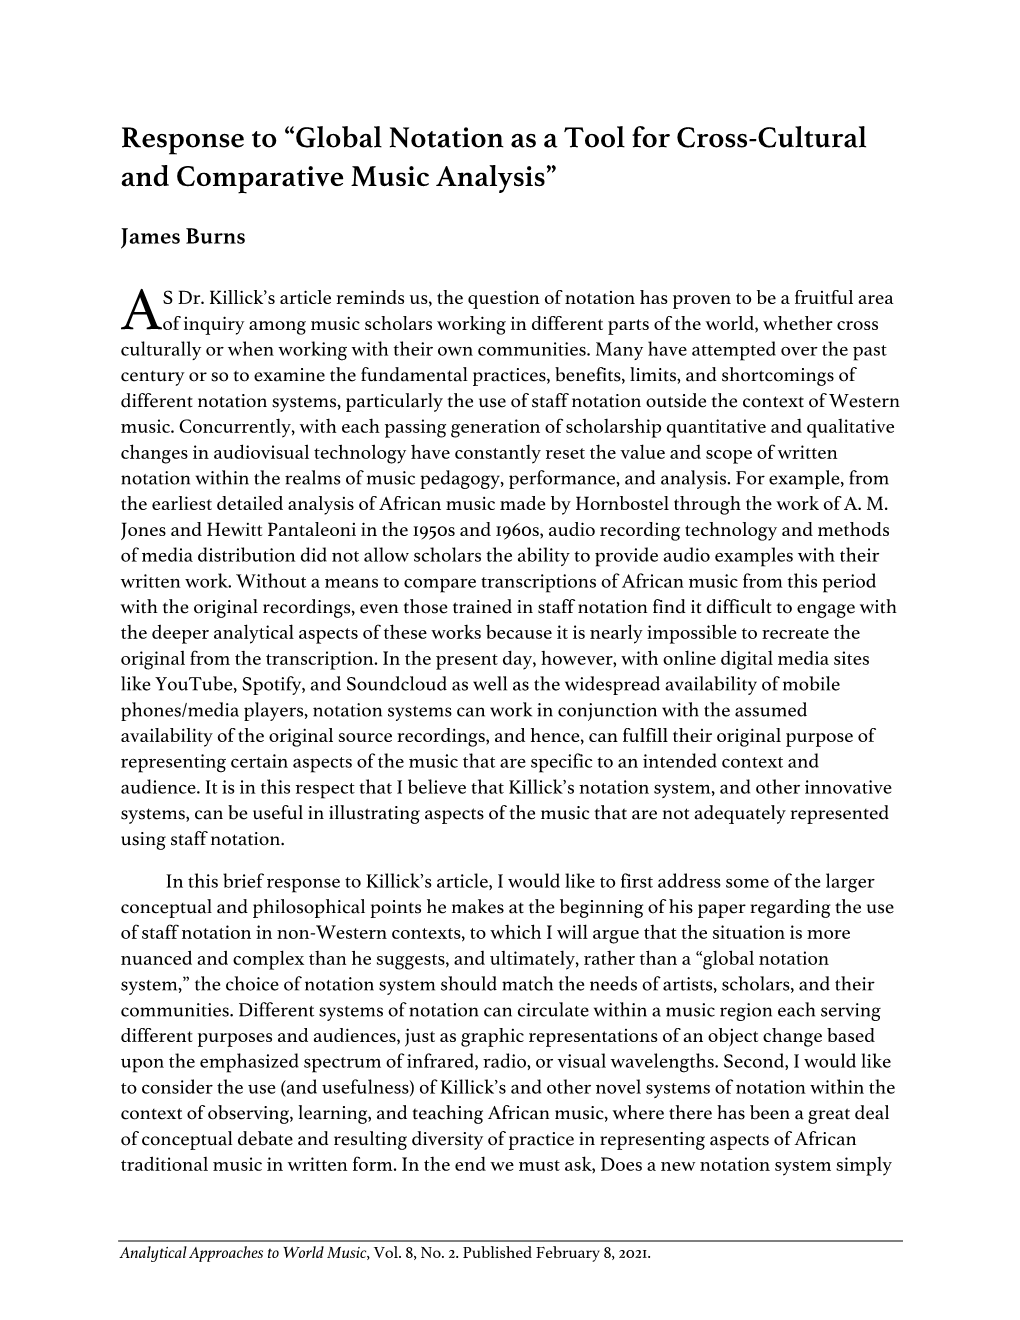 Global Notation As a Tool for Cross-Cultural and Comparative Music Analysis”